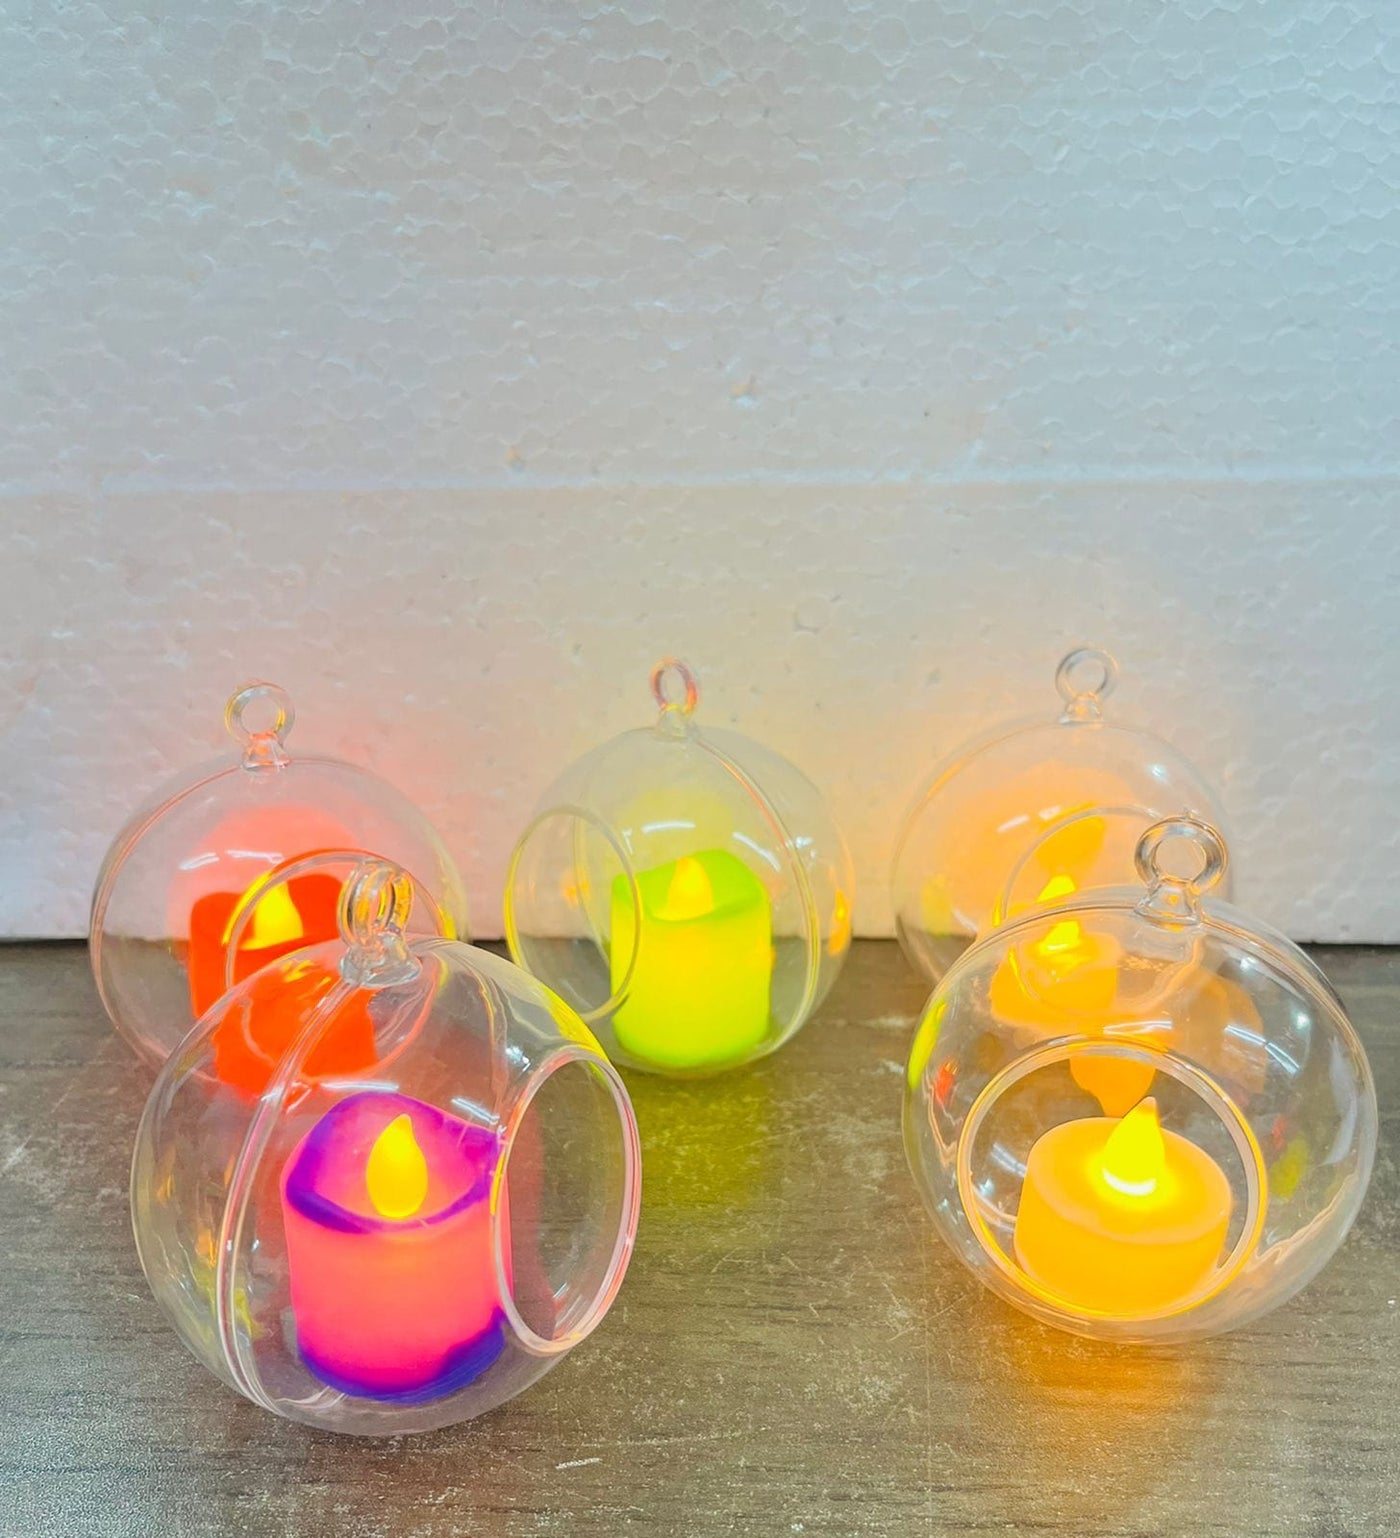 85 Rs each on Purchasing 100+ qty | Contact 8619550223 TeaLight Holder LAMANSH Acrylic Round Ball Shape Tealight Candle holder Planter Hanging / Fillable Ball Ornament for Micro Landscape, Home Decorations, Wedding, Gifts, Crafts